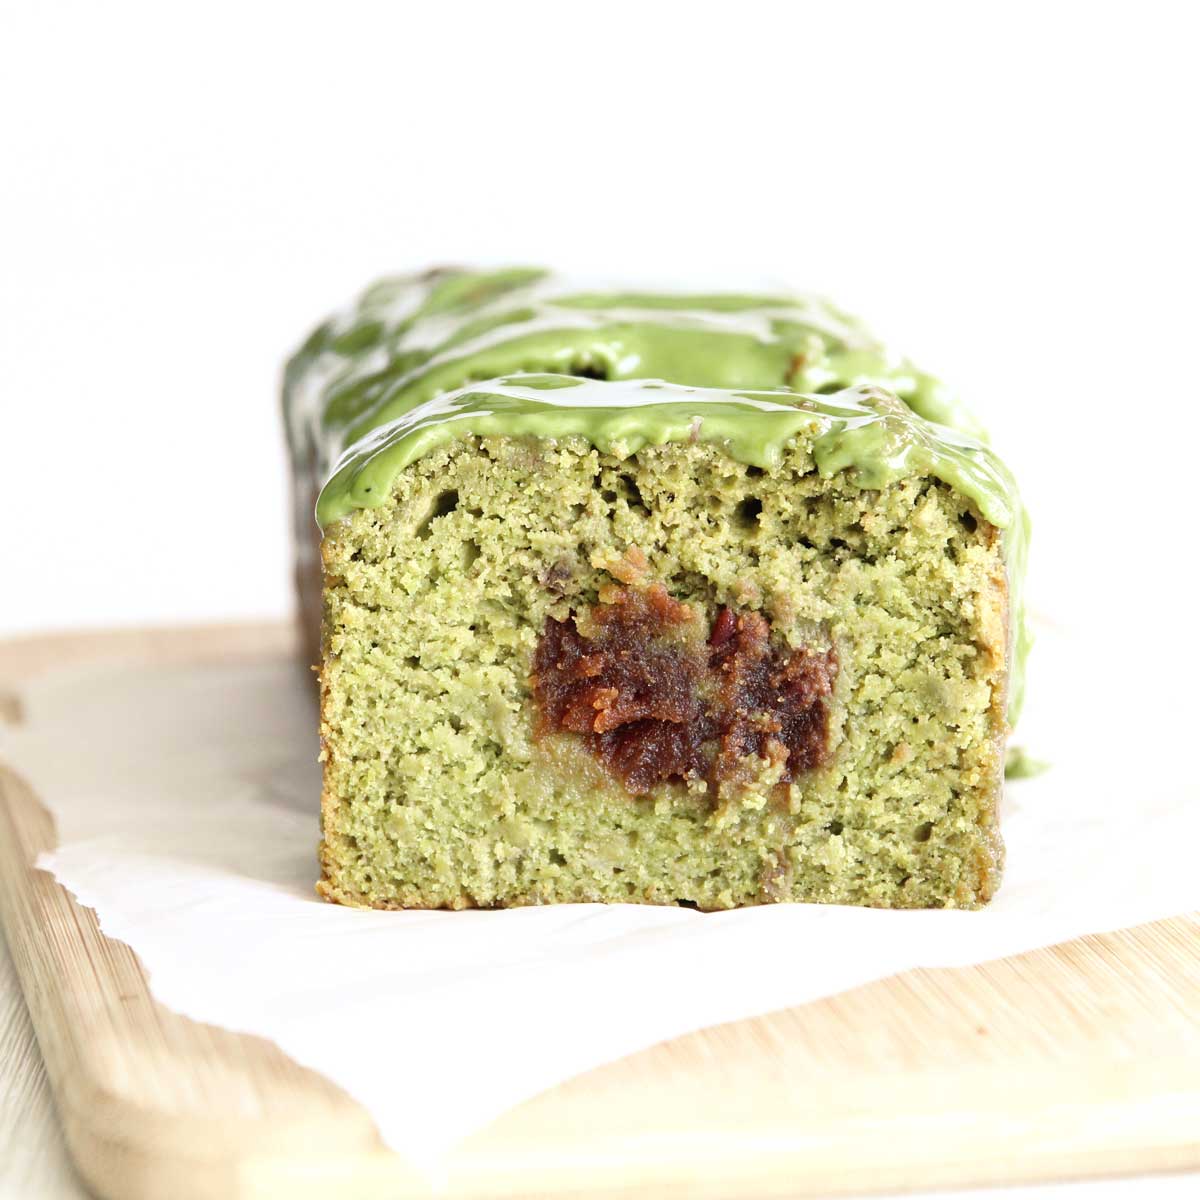 How to Make Matcha Banana Bread with Red Bean Paste Filling - Japanese Matcha Roll Cake